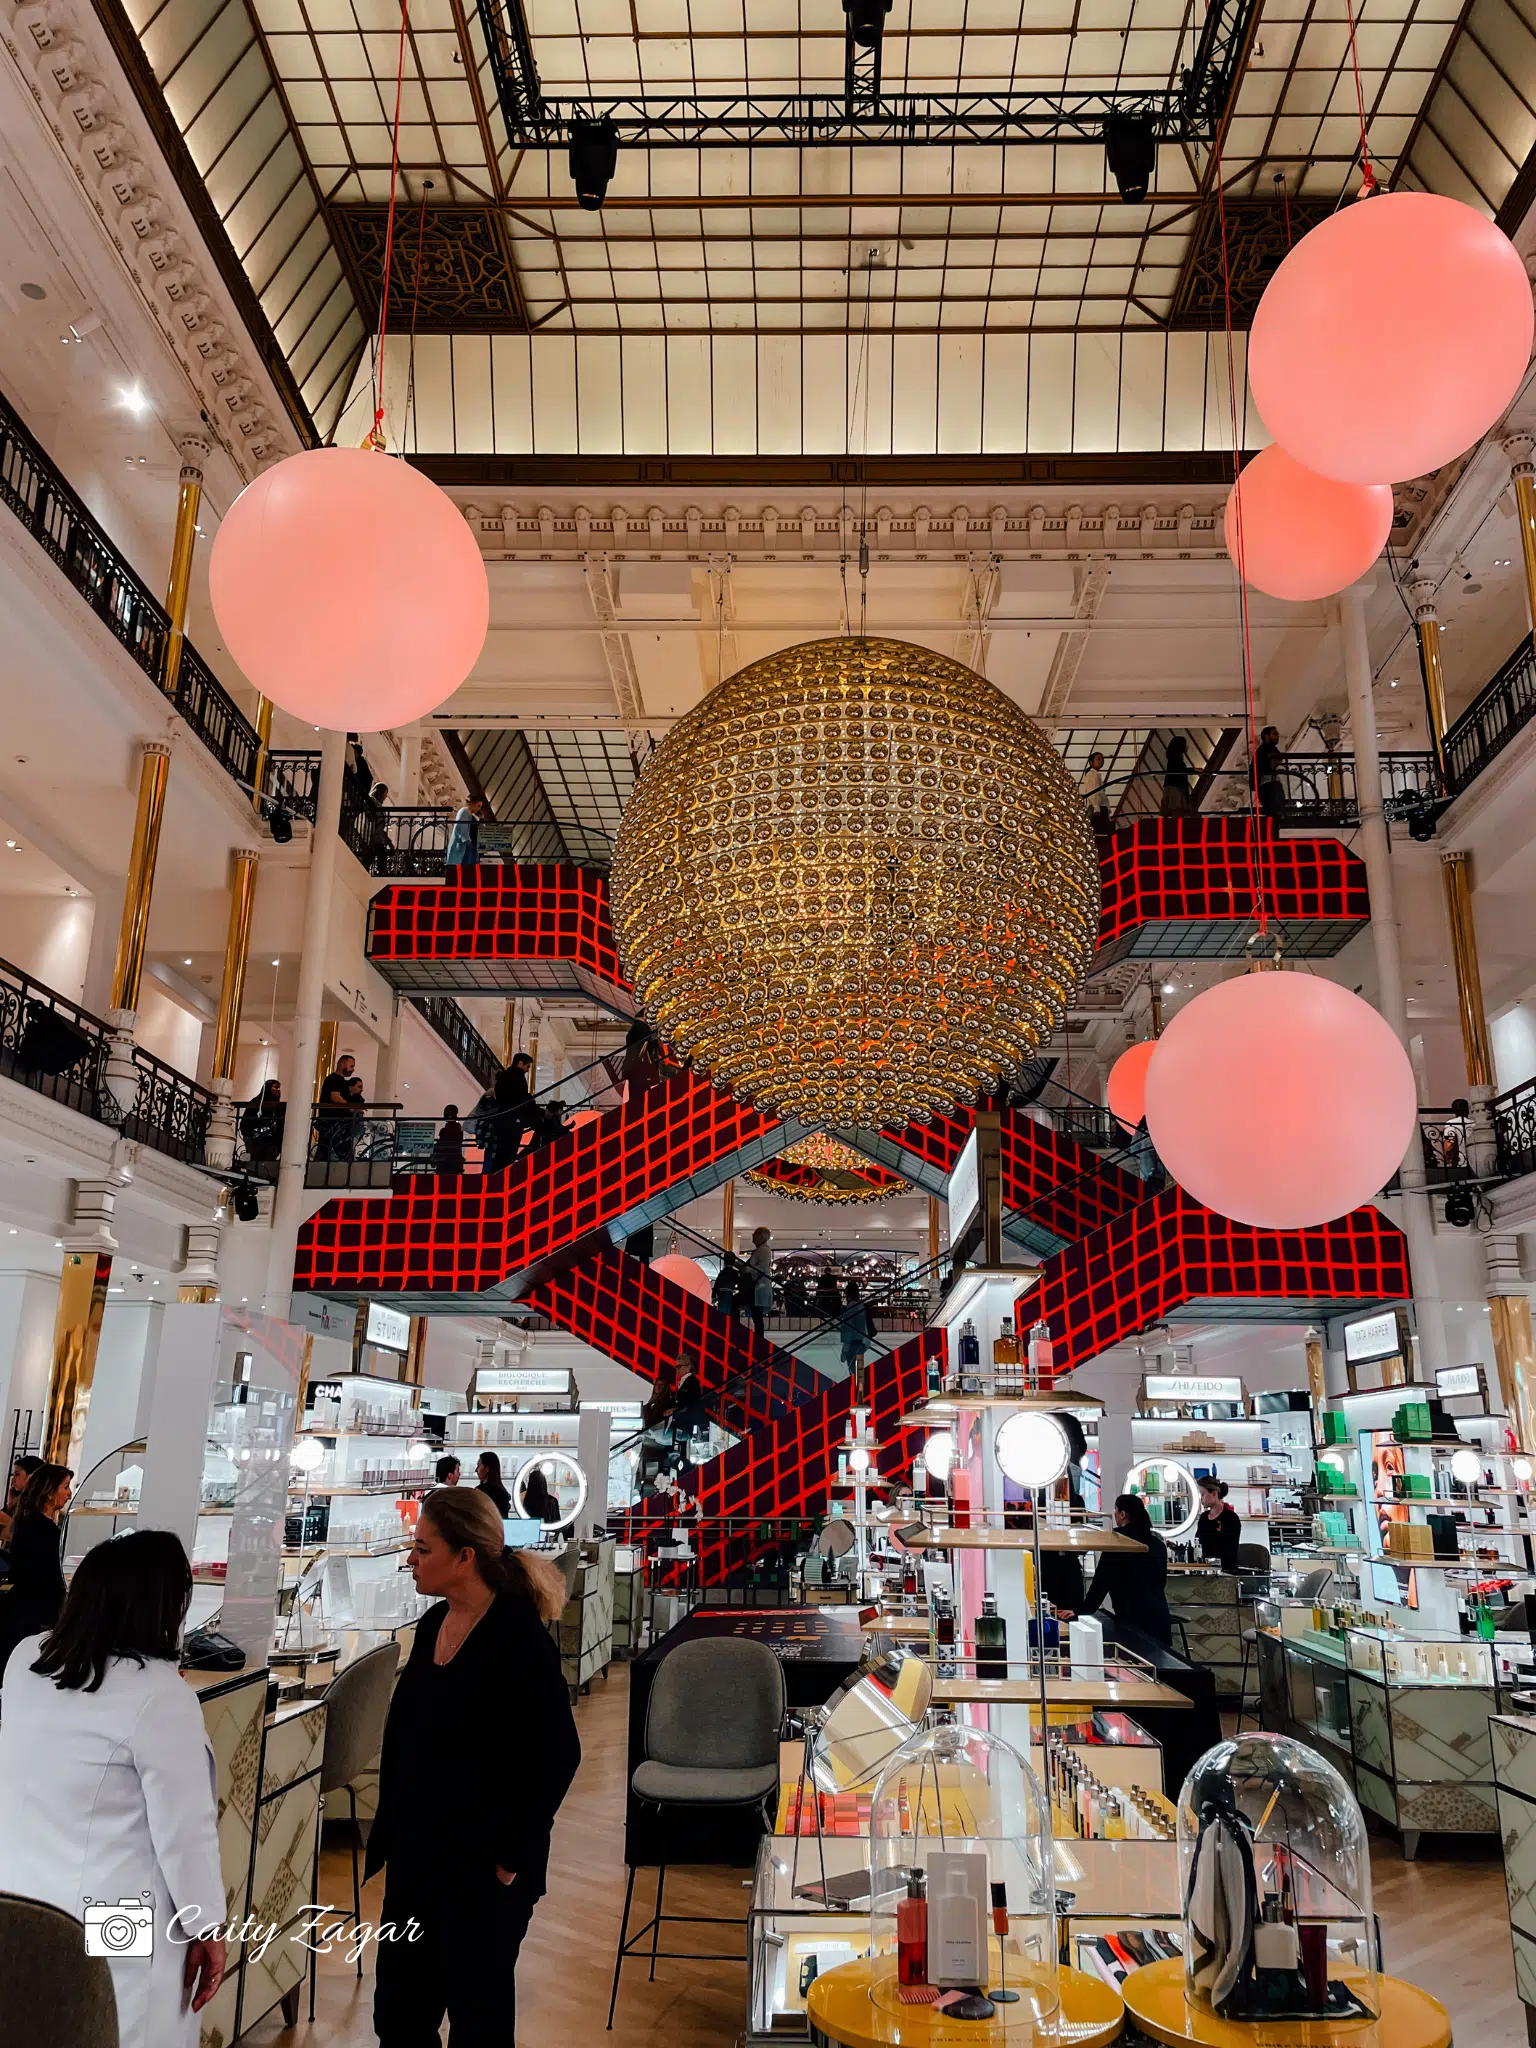 The iconic elevators and display inside Le Bon Marche